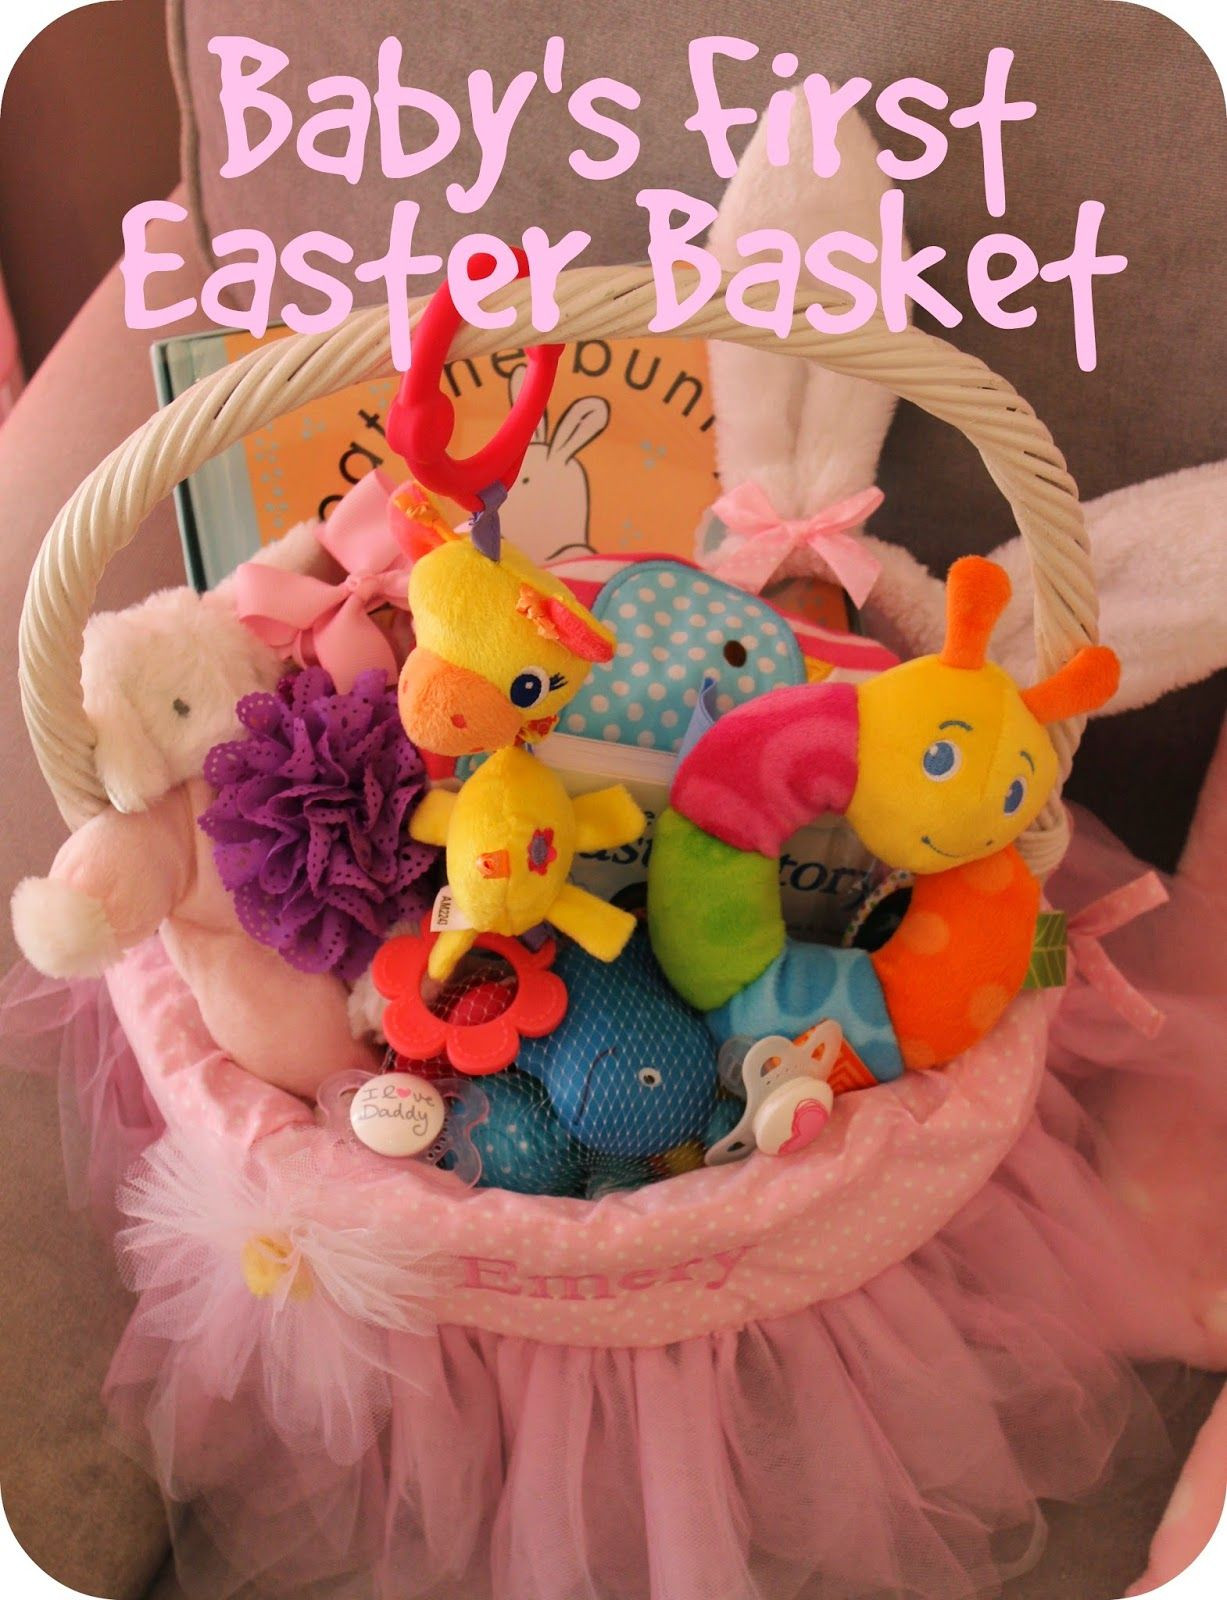 Gift Ideas For Baby'S First Easter
 baby s first easter basket ideas for a newborn